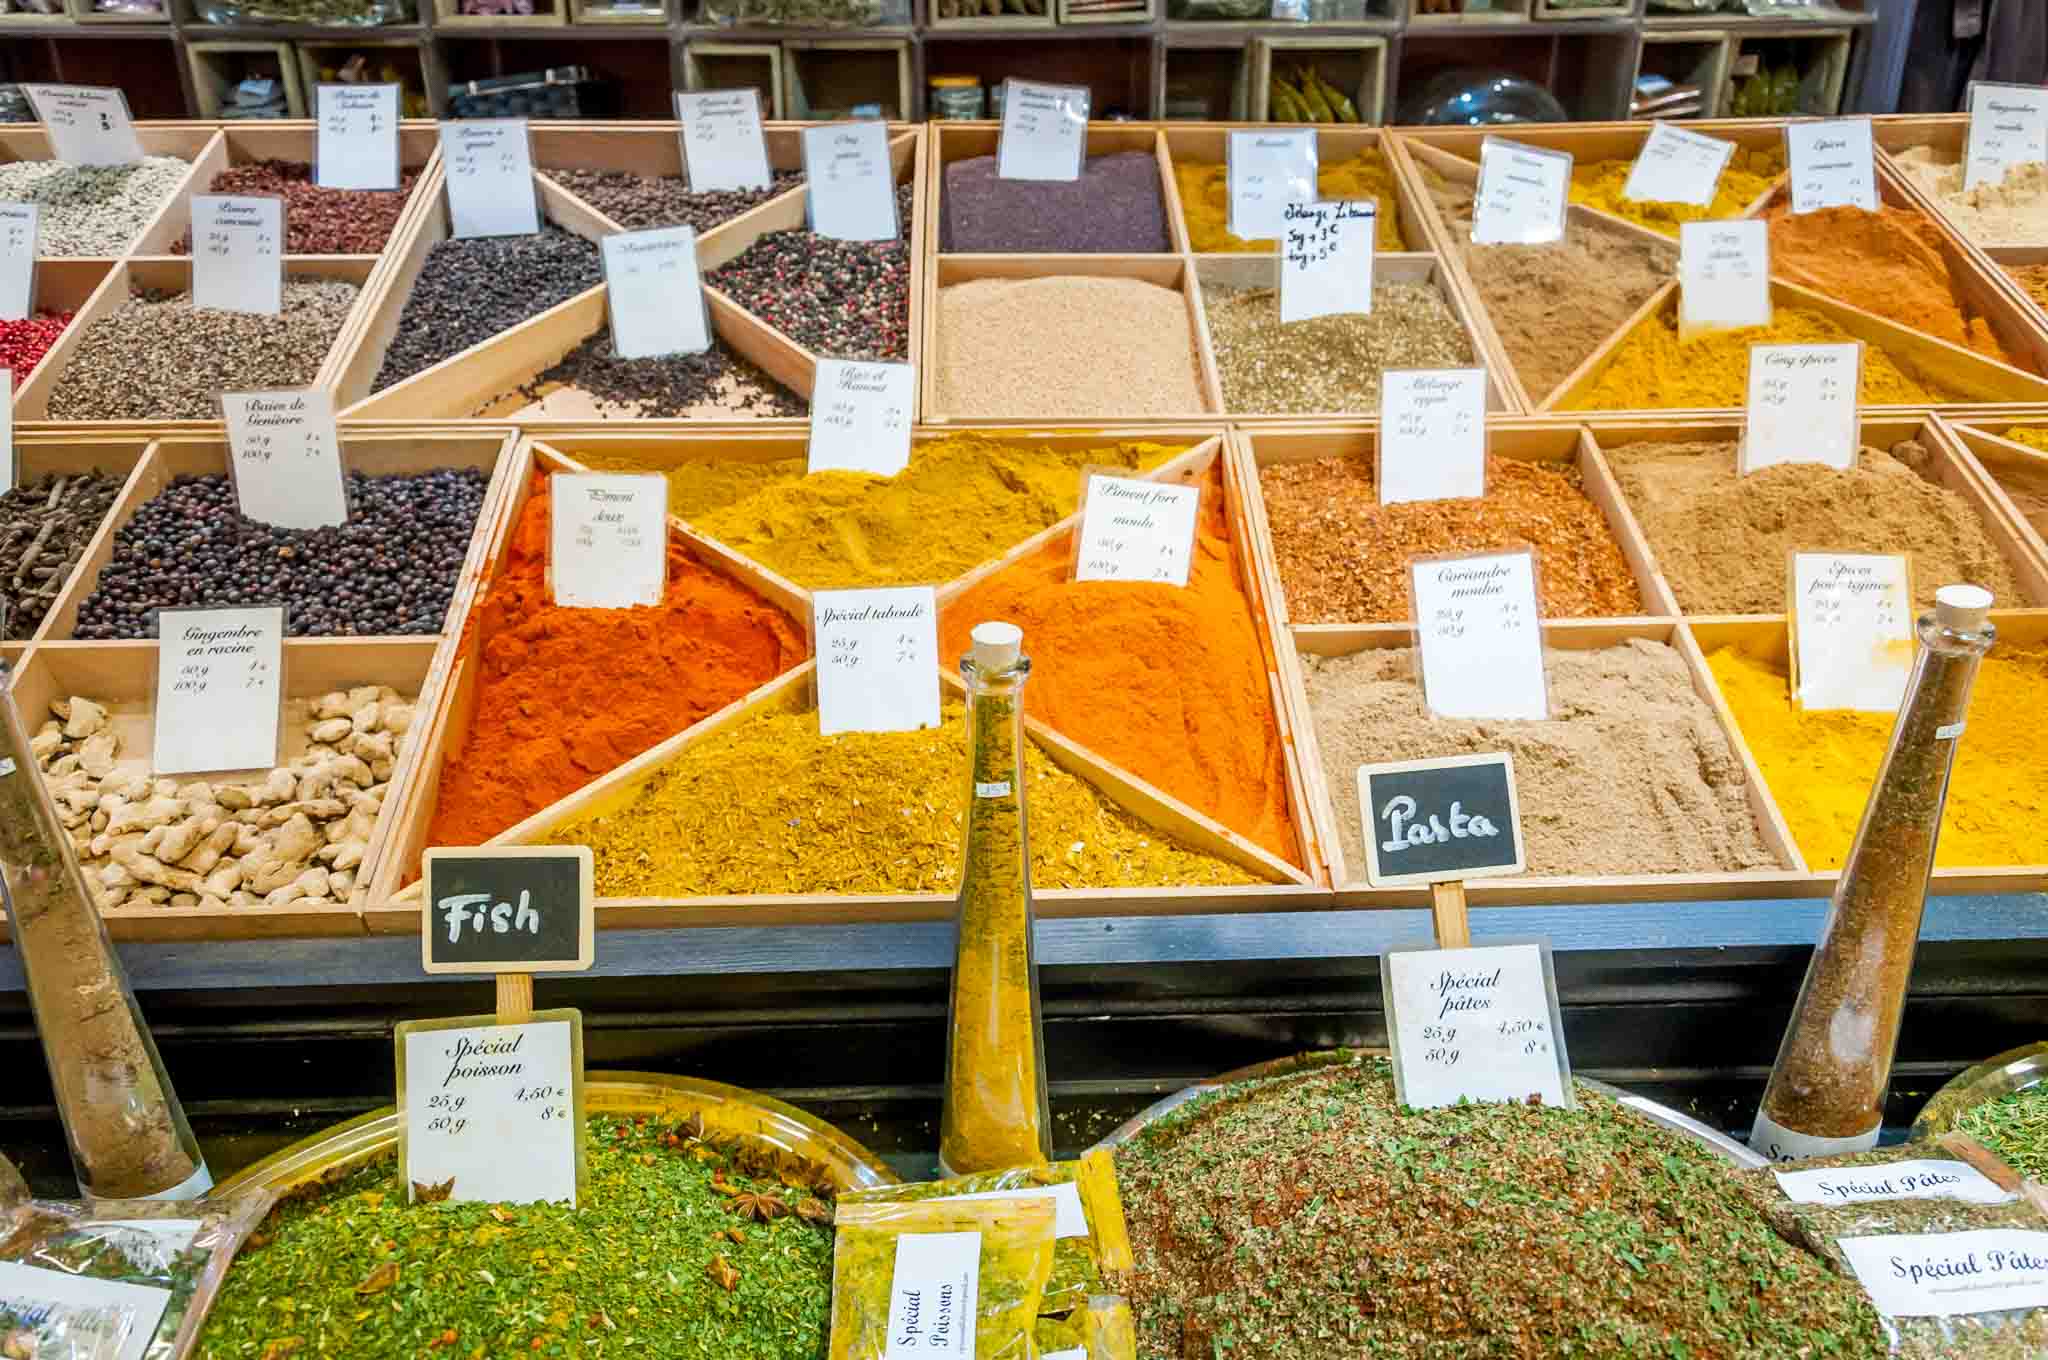 Spices for sale at the Les Halles market